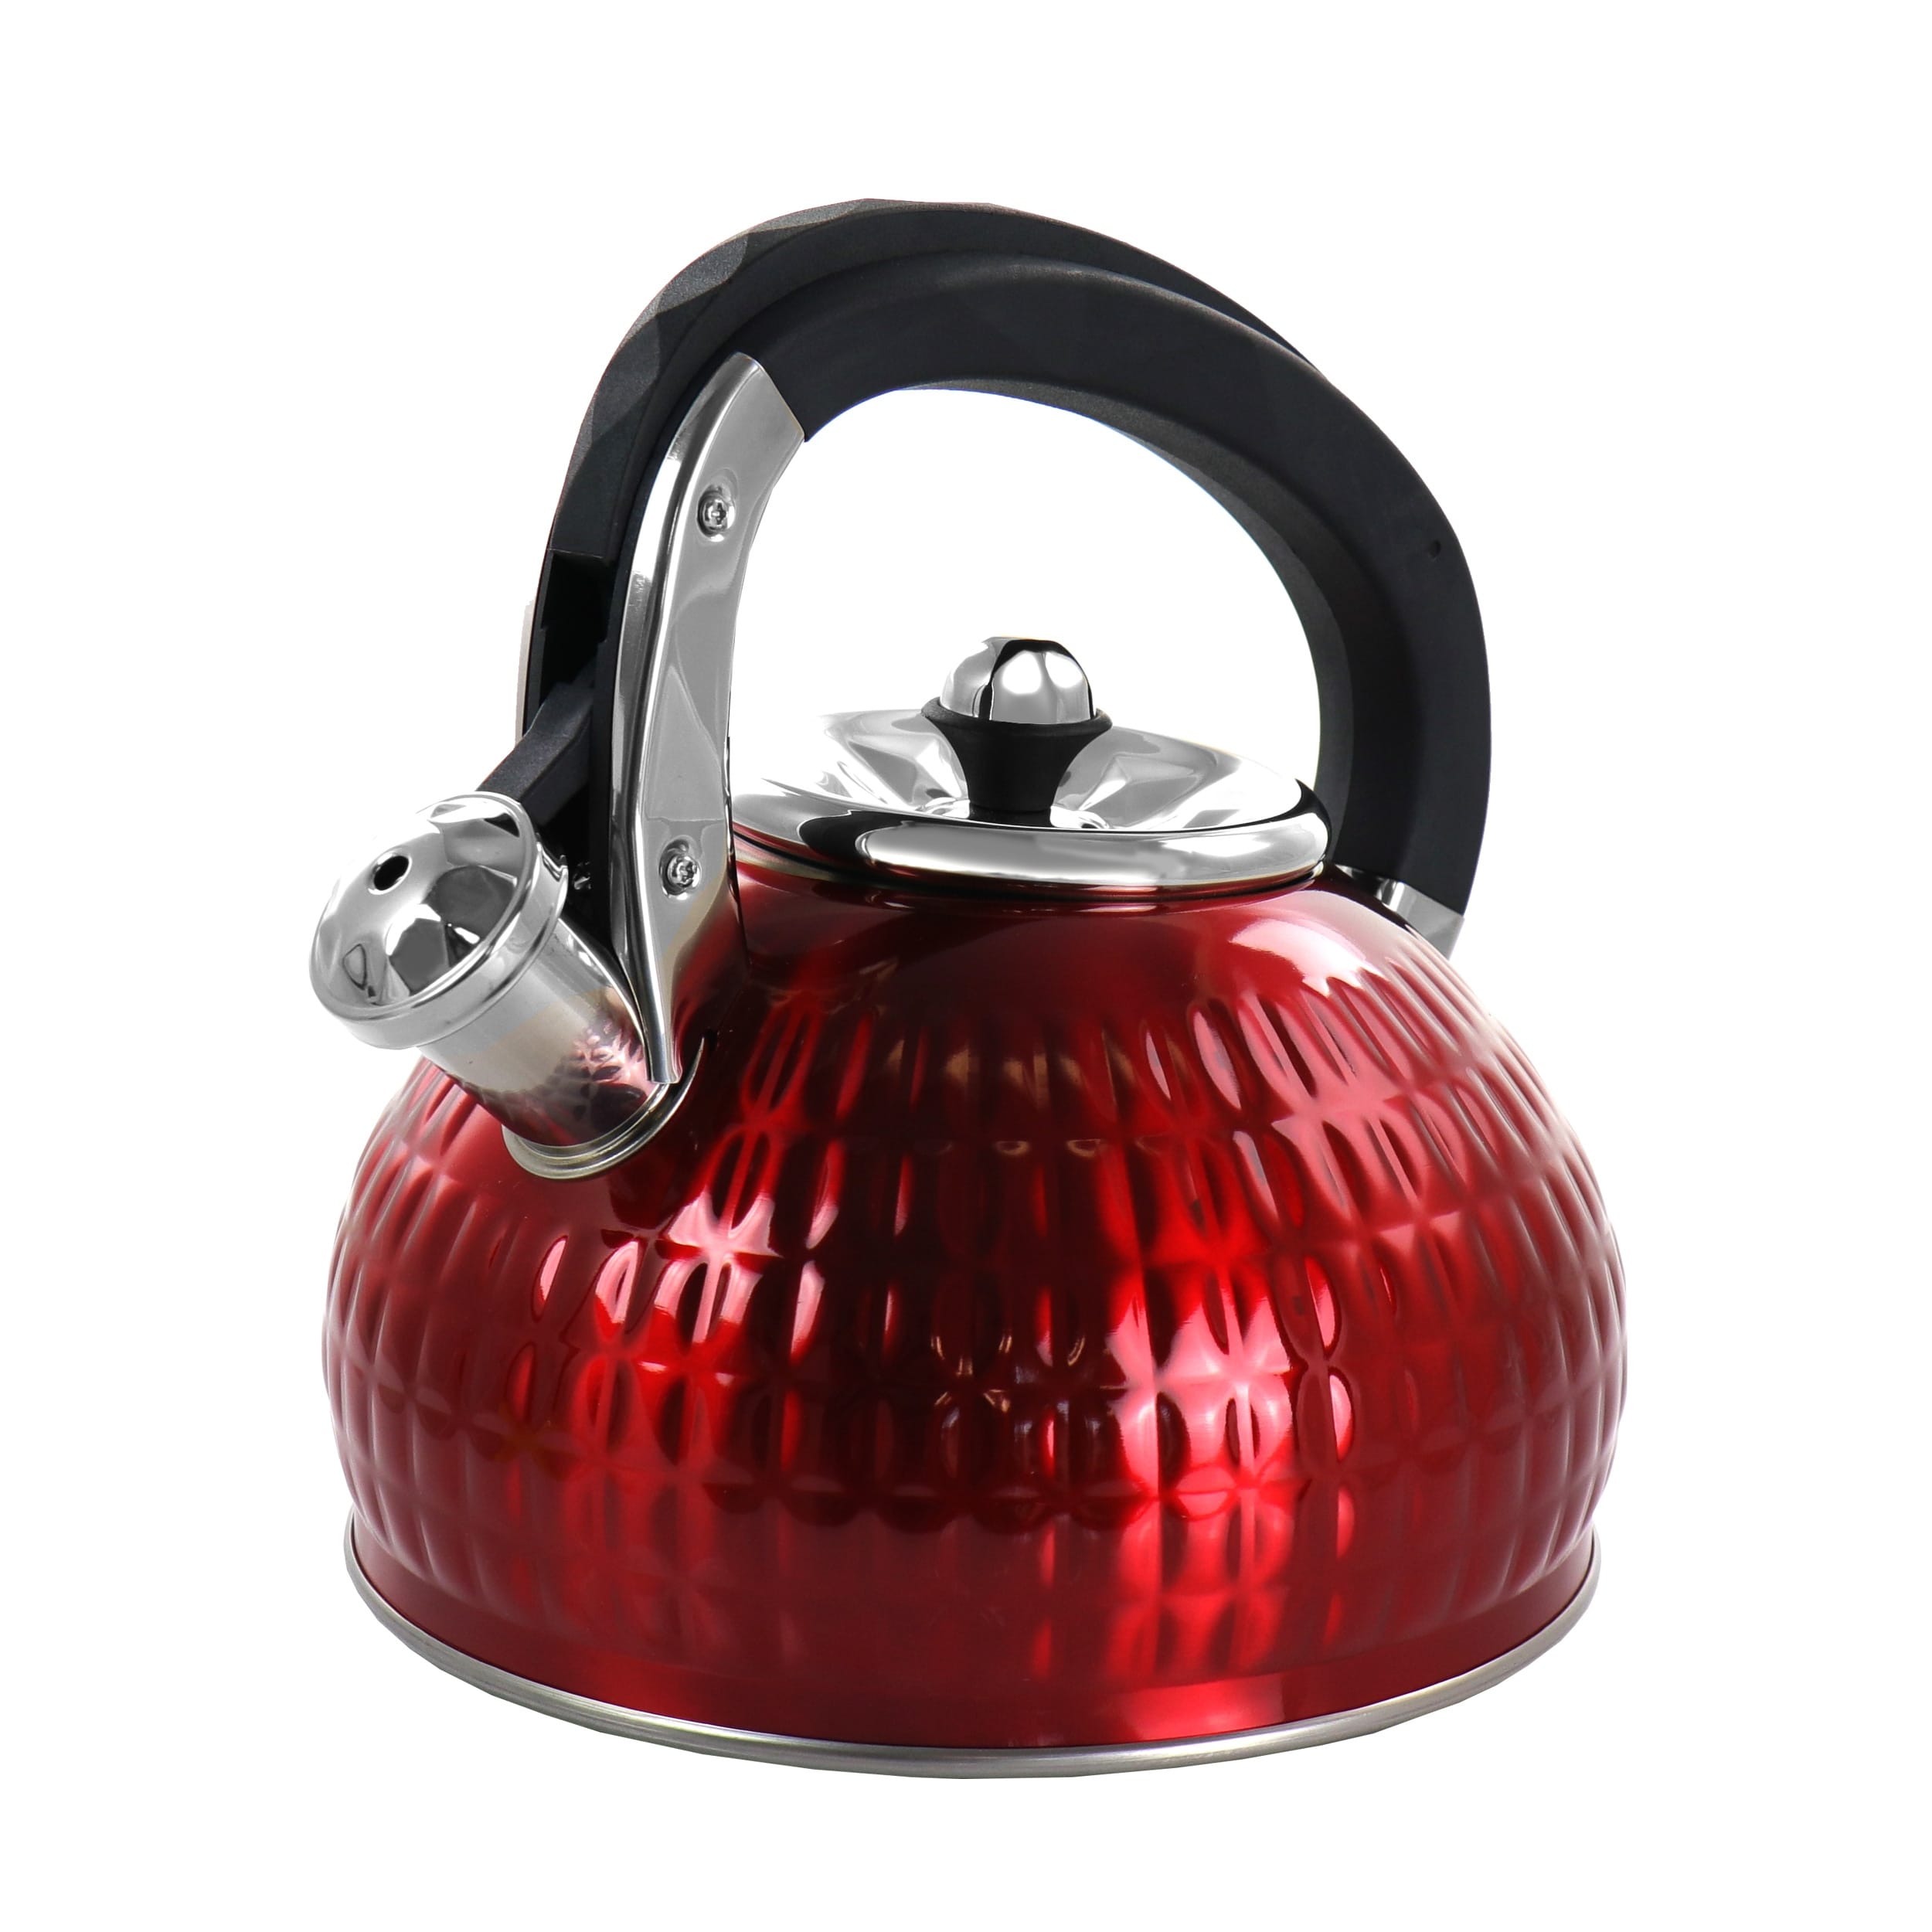 https://ak1.ostkcdn.com/images/products/is/images/direct/95e761178efee841f7f1d51a943871aa4d7c4be6/MegaChef-3-Liter-Stovetop-Whistling-Kettle-in-Red.jpg